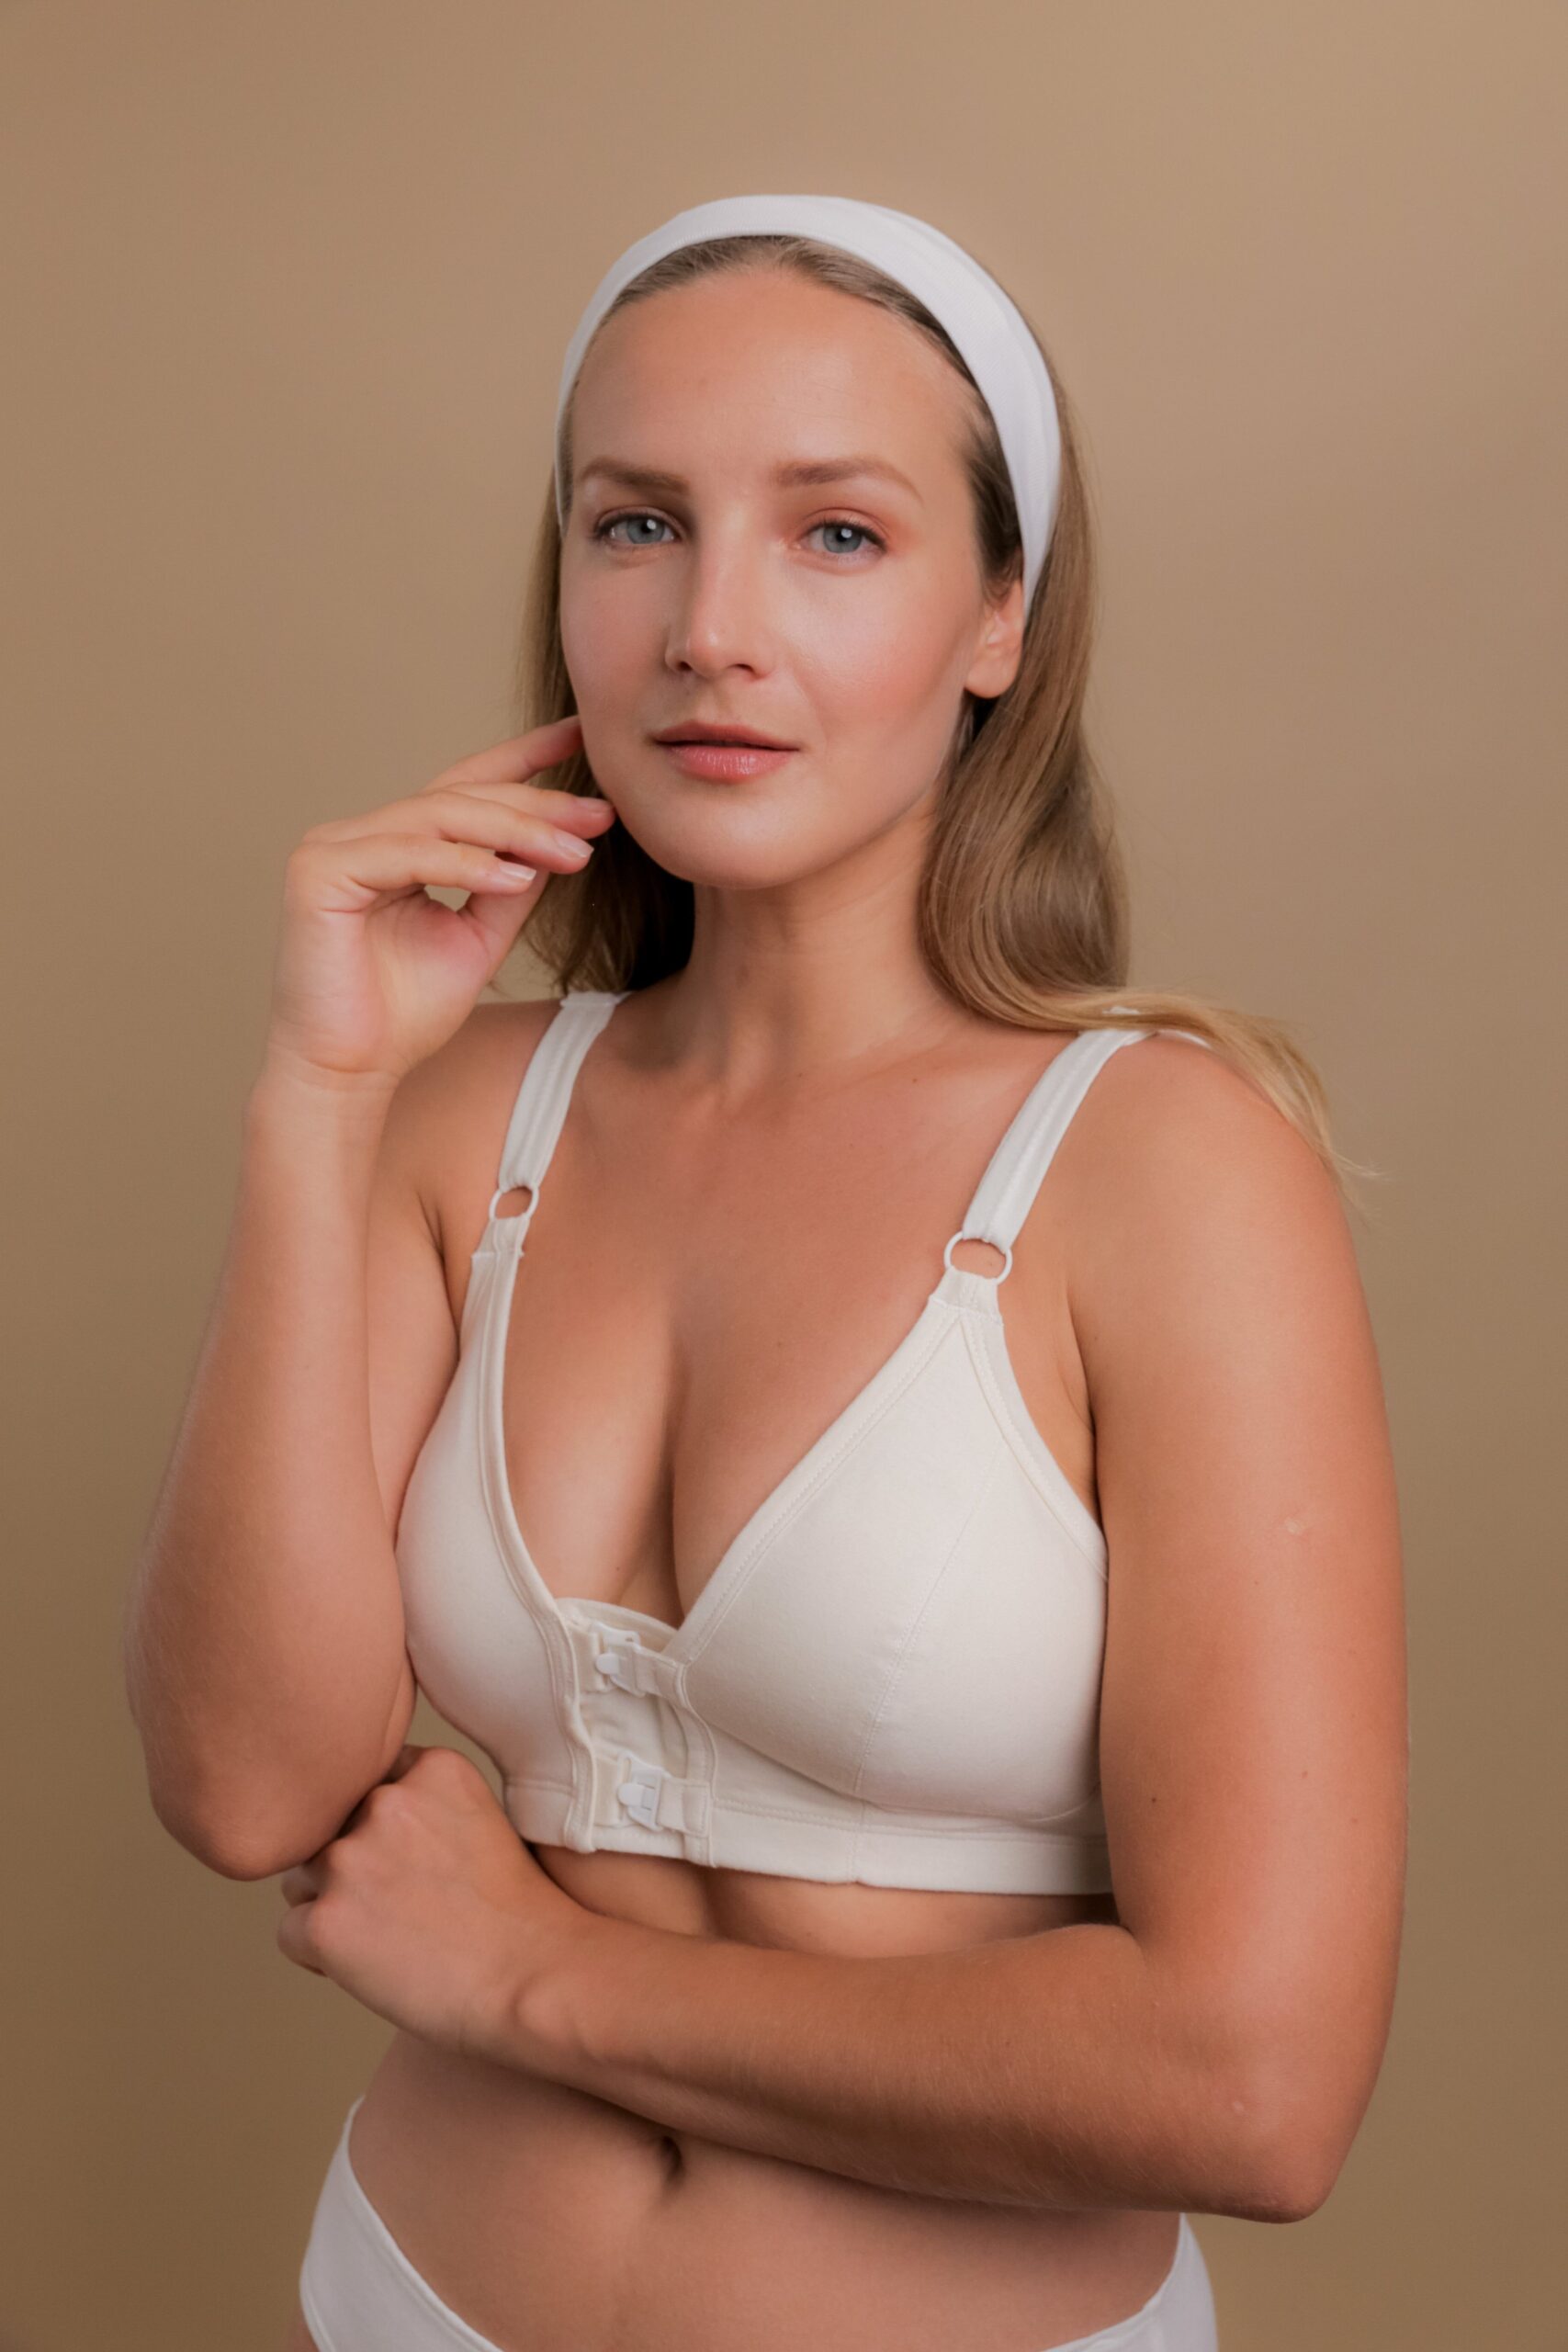 Classic Comfort: Stay Supported with Stylish Cotton Bras